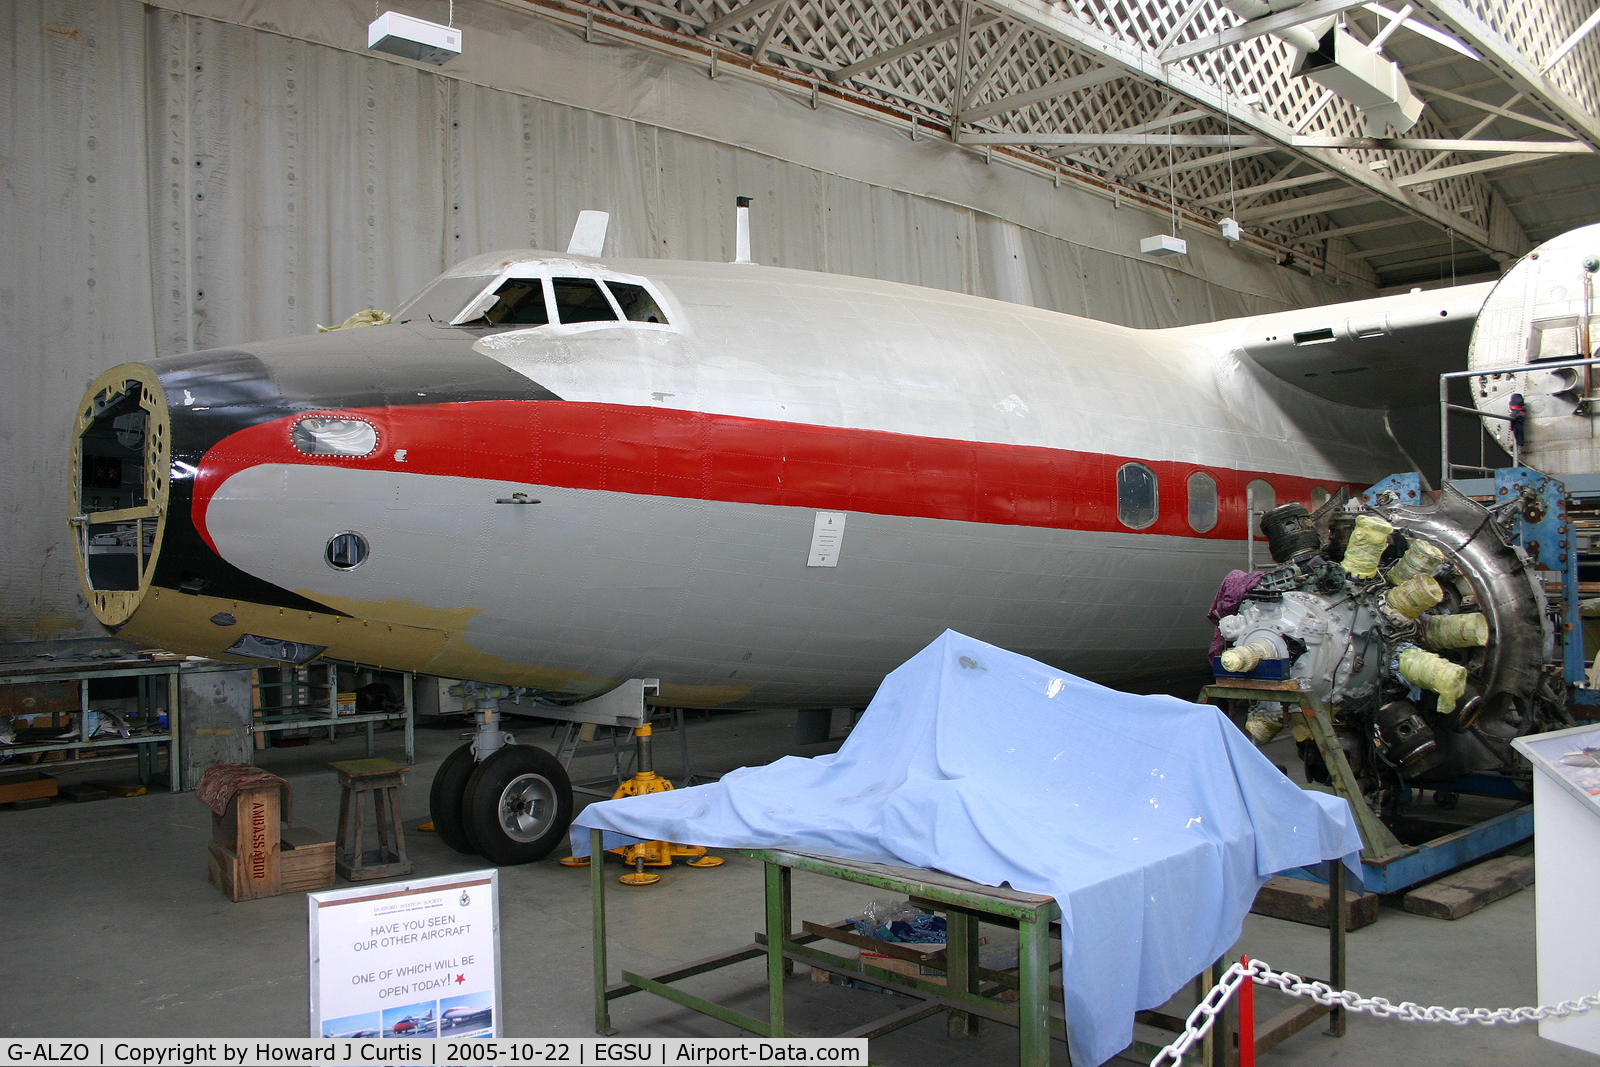 G-ALZO, 1950 Airspeed AS57 Ambassador 2 C/N 5226, Slowly being restored. The job was complete by 2012.